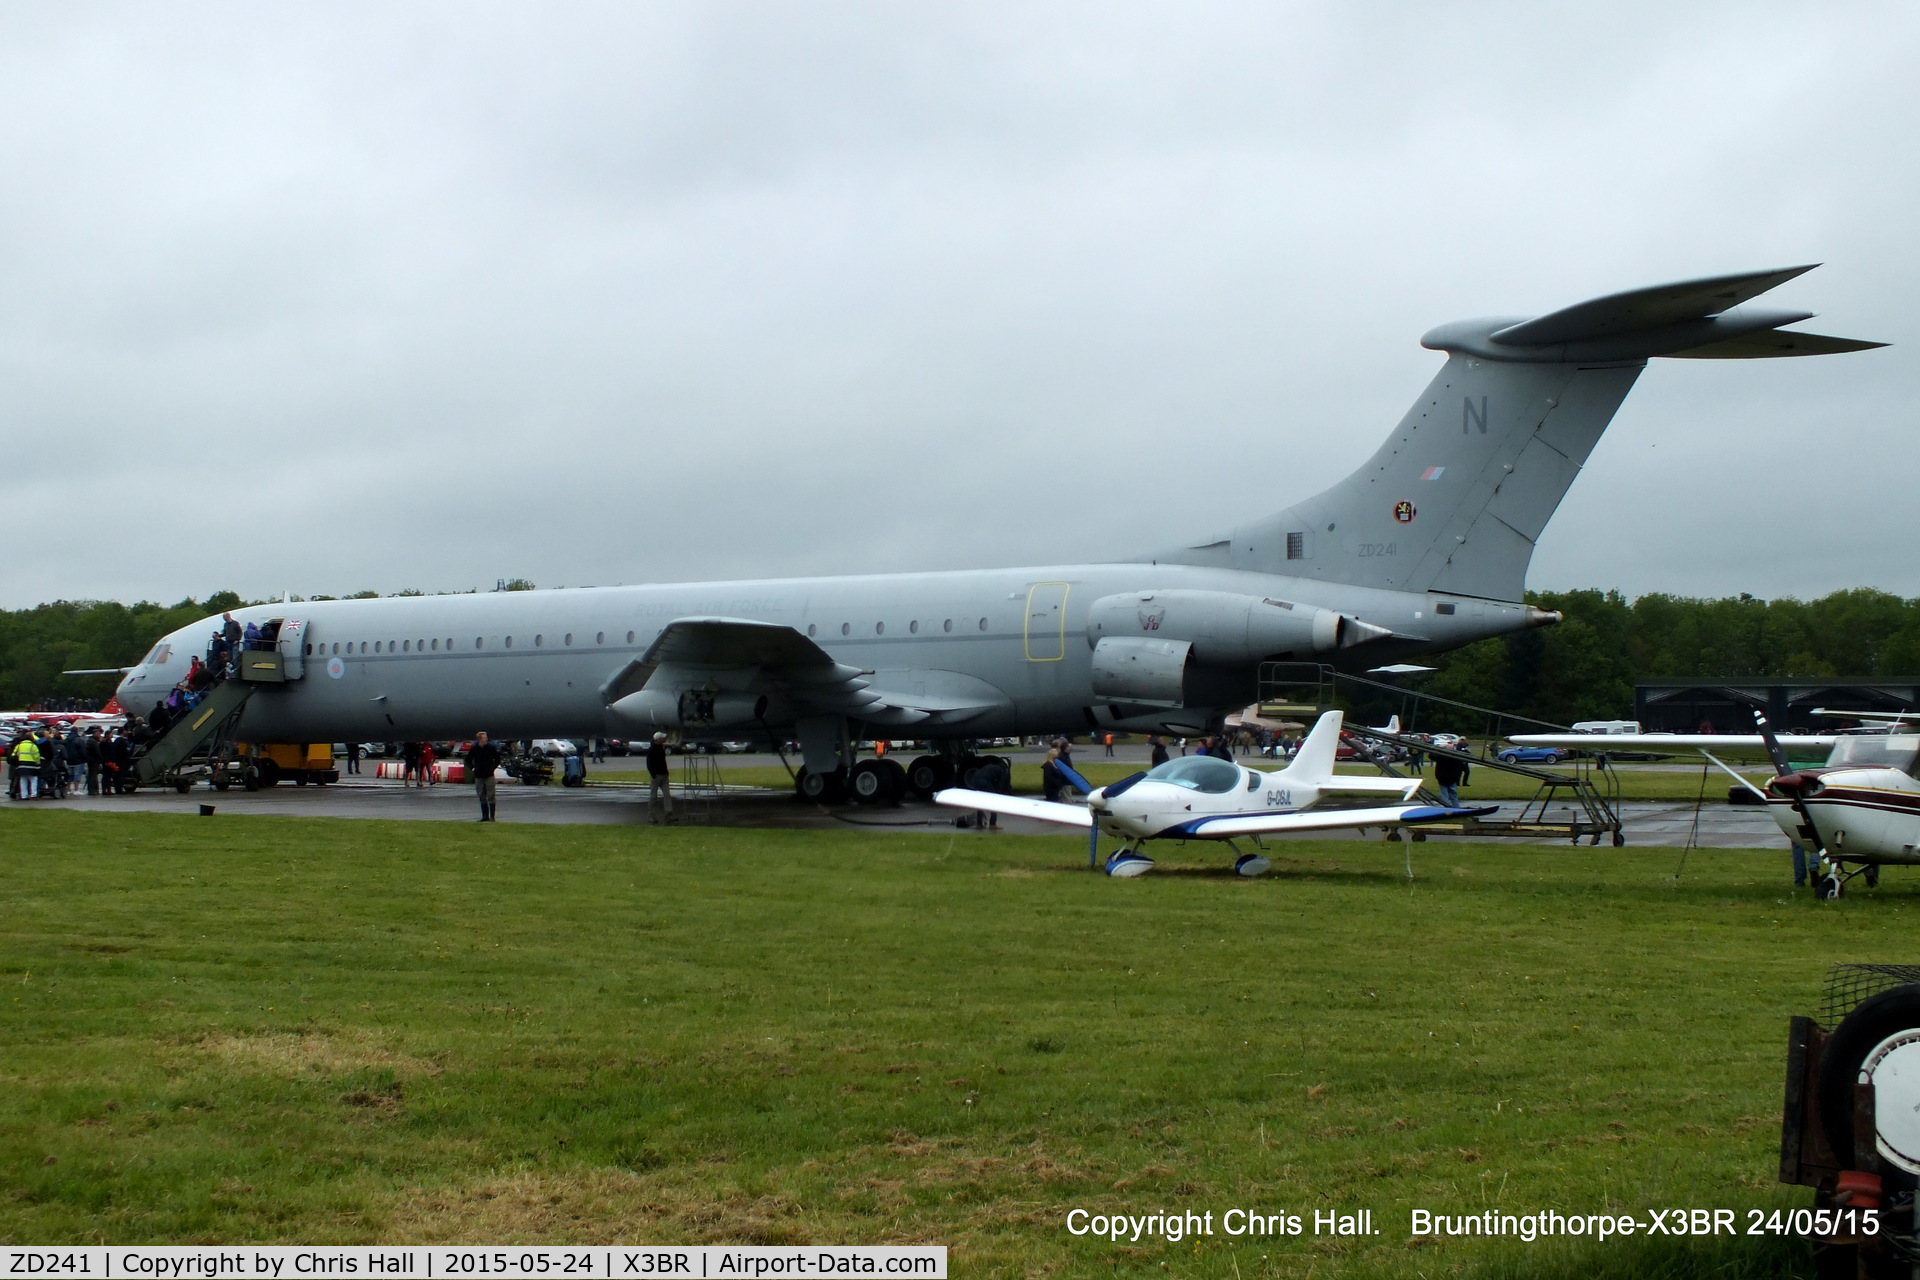 ZD241, 1968 Vickers Super VC10 K.4 C/N 863, at the Cold War Jets Open Day 2015